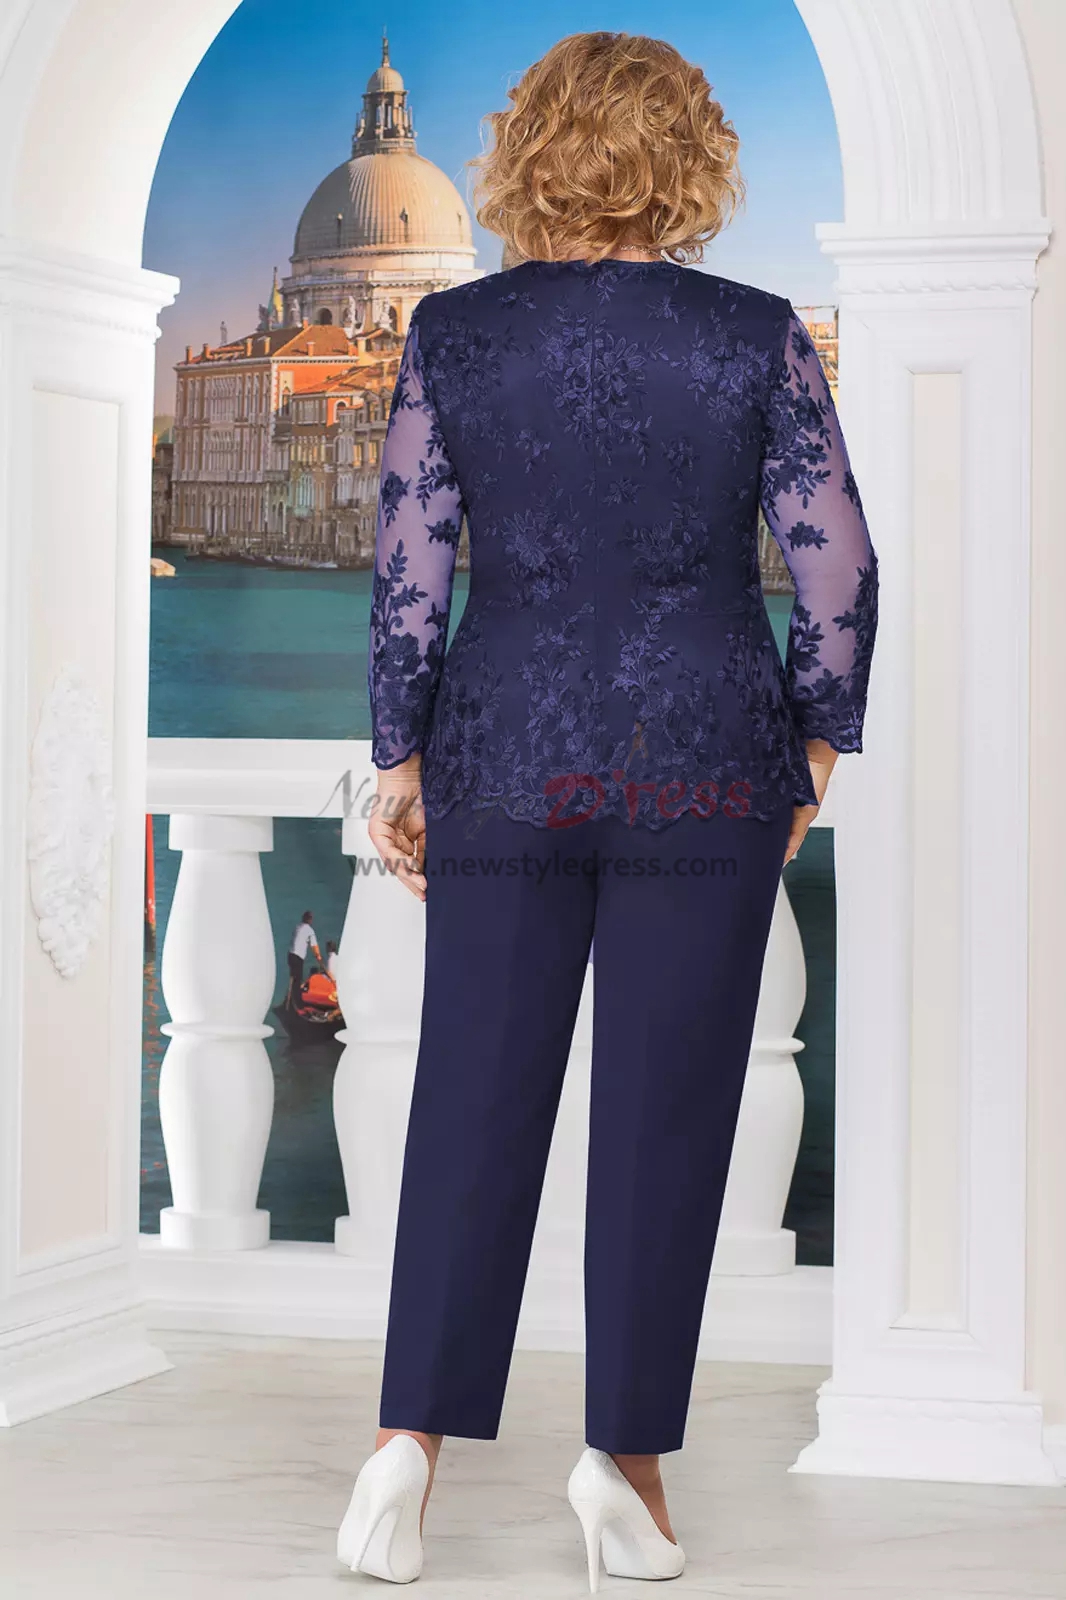 2PC Plus size Mother of the bride pant suits Lace top and Chiffon pants